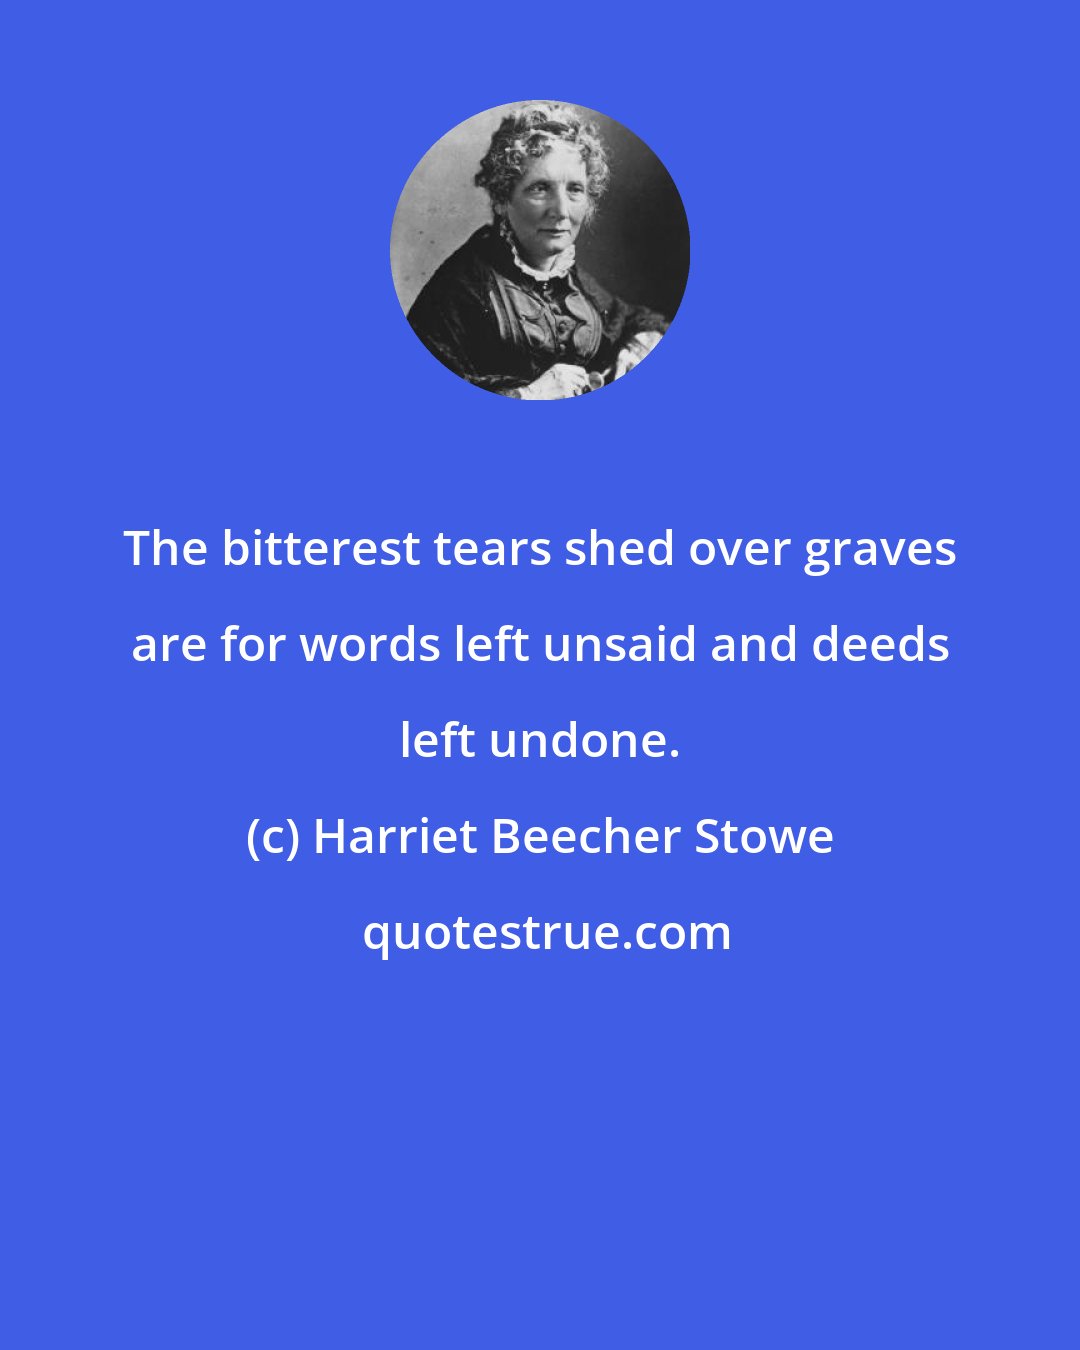 Harriet Beecher Stowe: The bitterest tears shed over graves are for words left unsaid and deeds left undone.